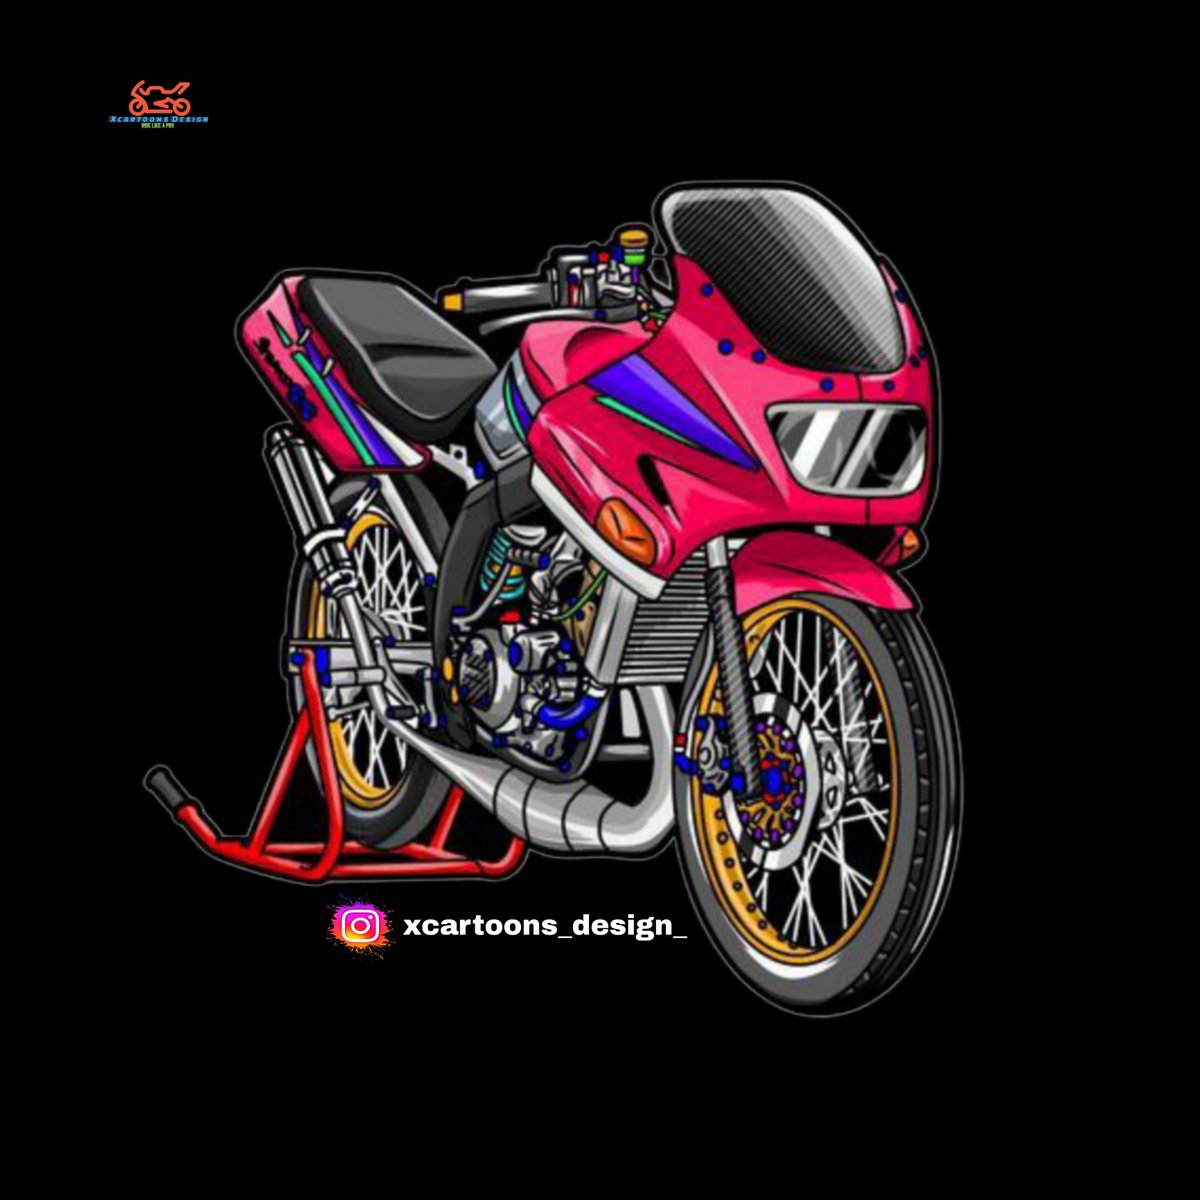 Put a smile on your face and a laugh in your heart with these humorous motorcycle cartoons. #motorcycles #motorcyclephotography #yamahar1 #motorcyclespirit #motorcycleshop #motorcyclestunts #motorcyclesafety #motorcycleseat #motorcyclestorehouse #motorcyclesclub